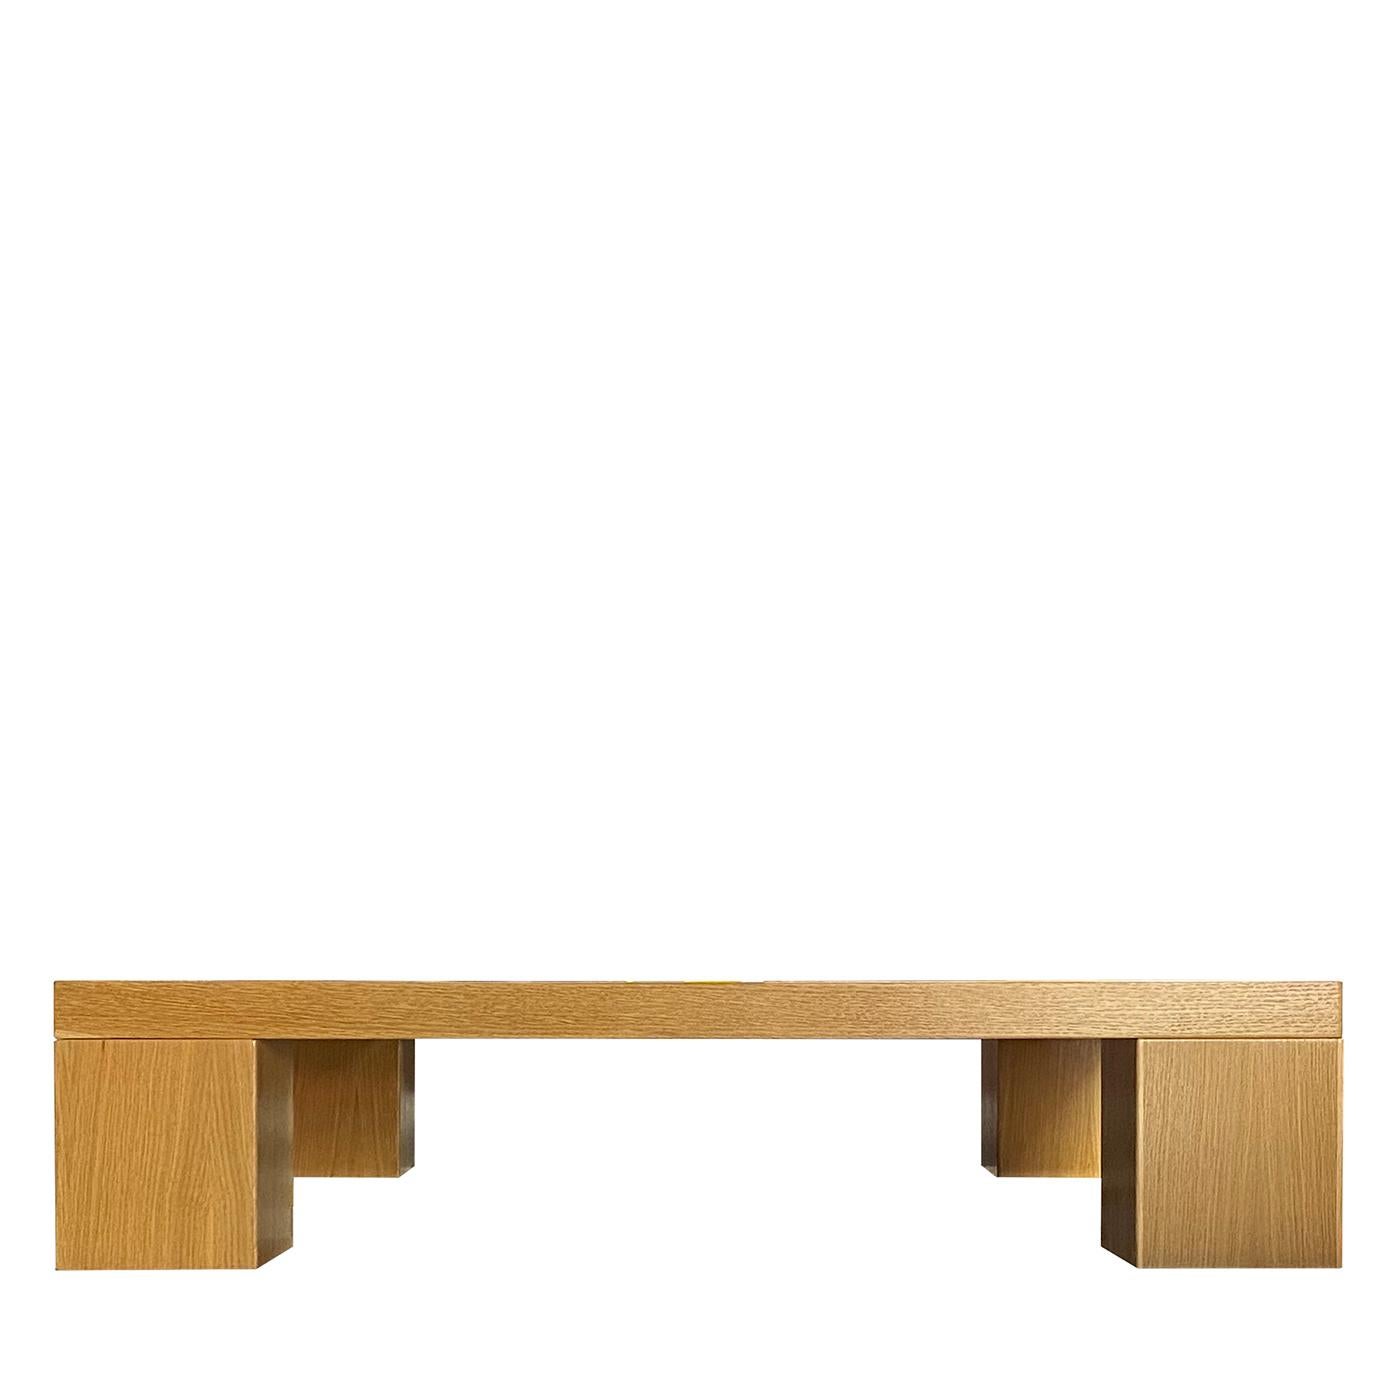 Part of a limited series of only 10 numbered pieces, this square coffee table is a showcase of geometric refinement and unpredictable natural allure. The grain offered by the minimalist durmast structure sharply conflicts with the luminous inlay in